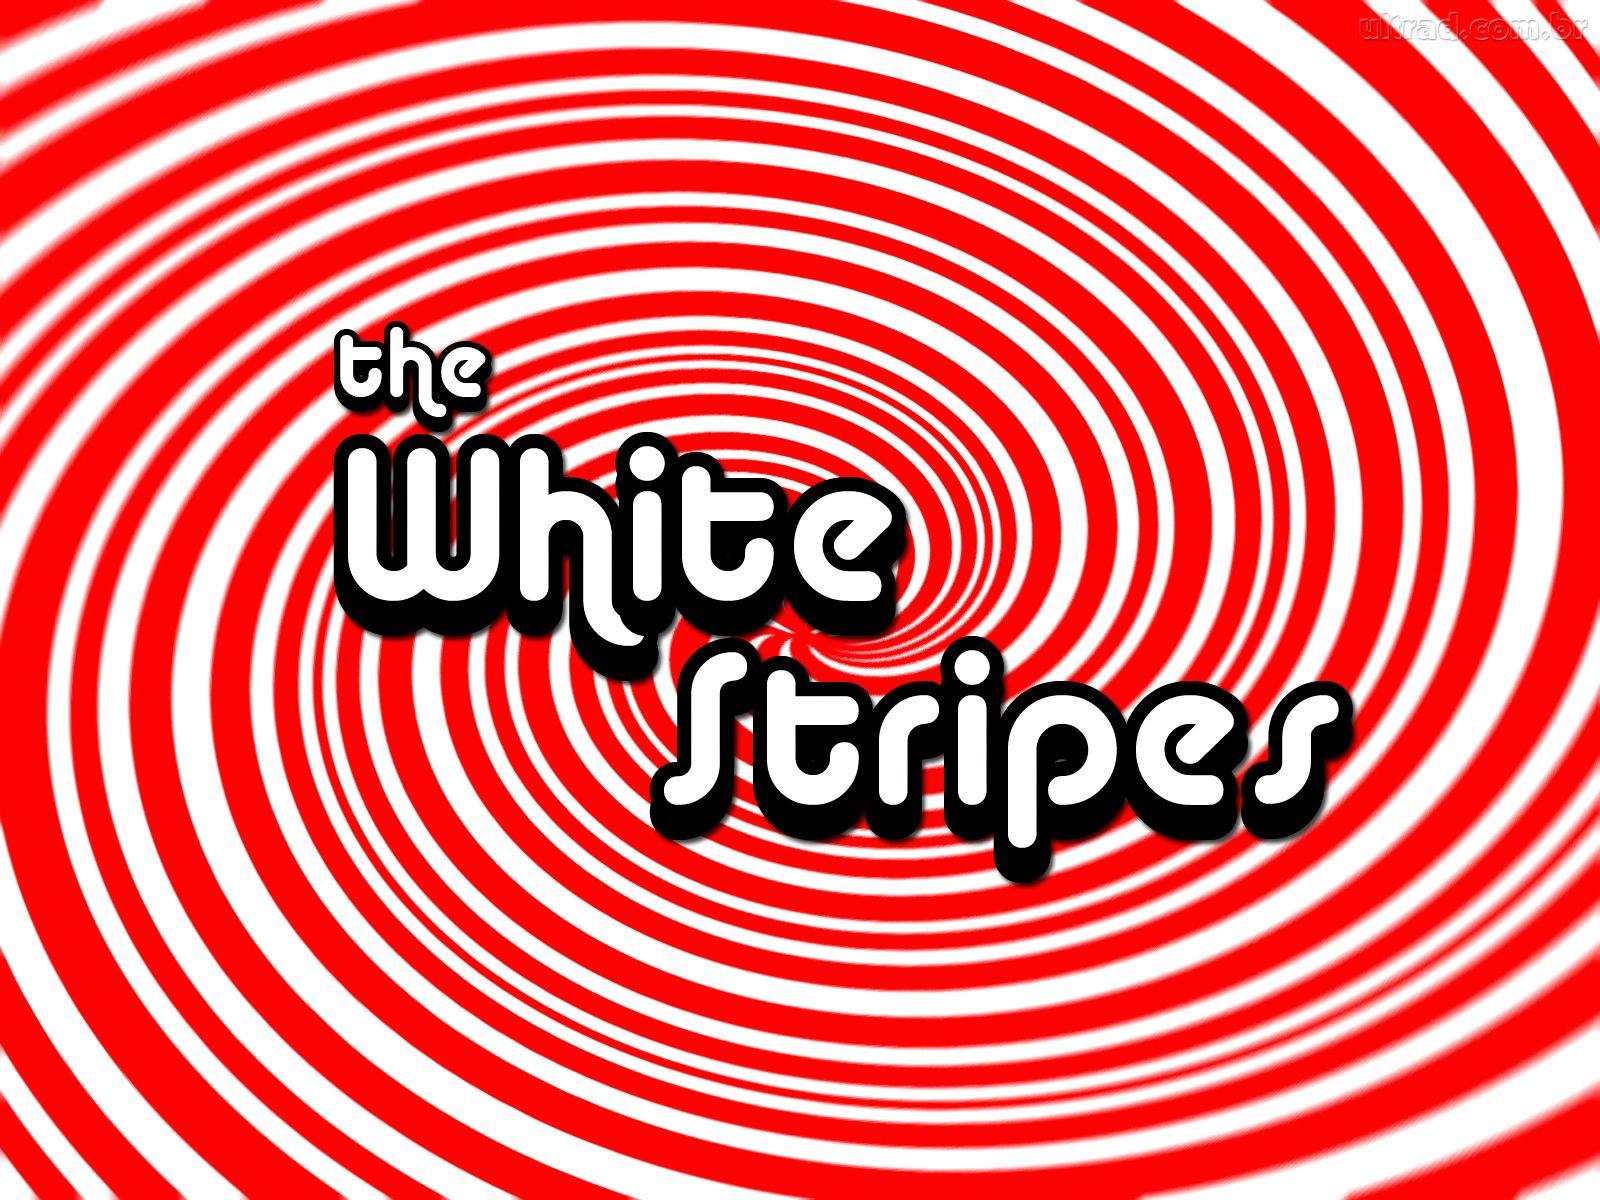 HD Photo Collection), 27.05. The White Stripes Wallpaper